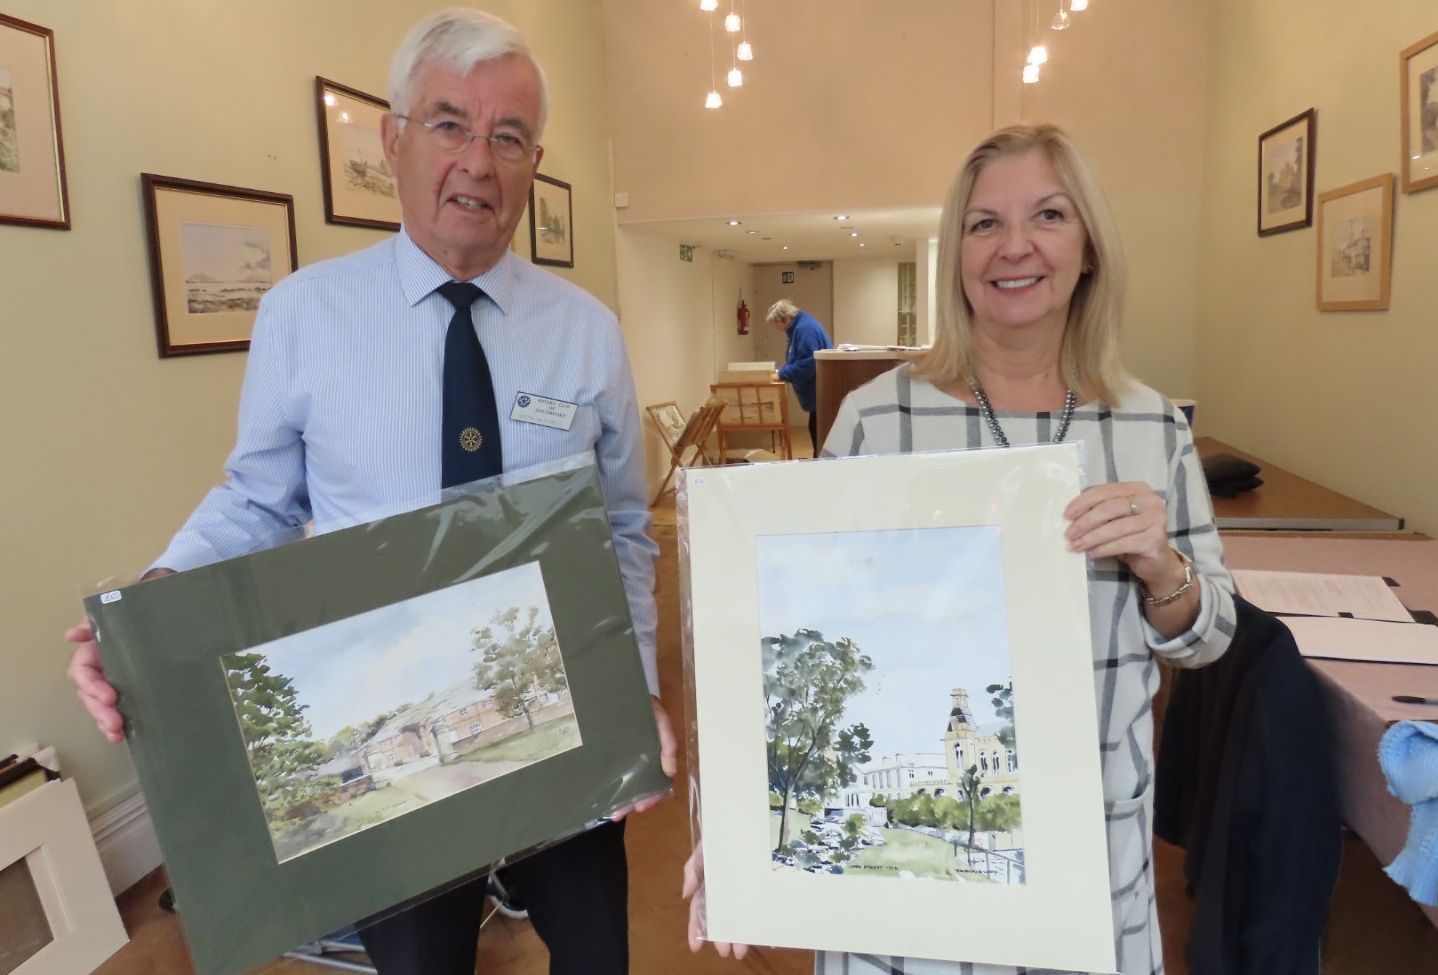 A special exhibition, John Duffy Watercolours, is taking place at Wayfarers Arcade on Lord Street in Southport town centre in collaboration with Johns family and The Rotary Club of Southport. Keith Mitchell from Southport Rotaary with Yvonne Burns from Wayfarers Arcade. Photo by Andrew Brown Media